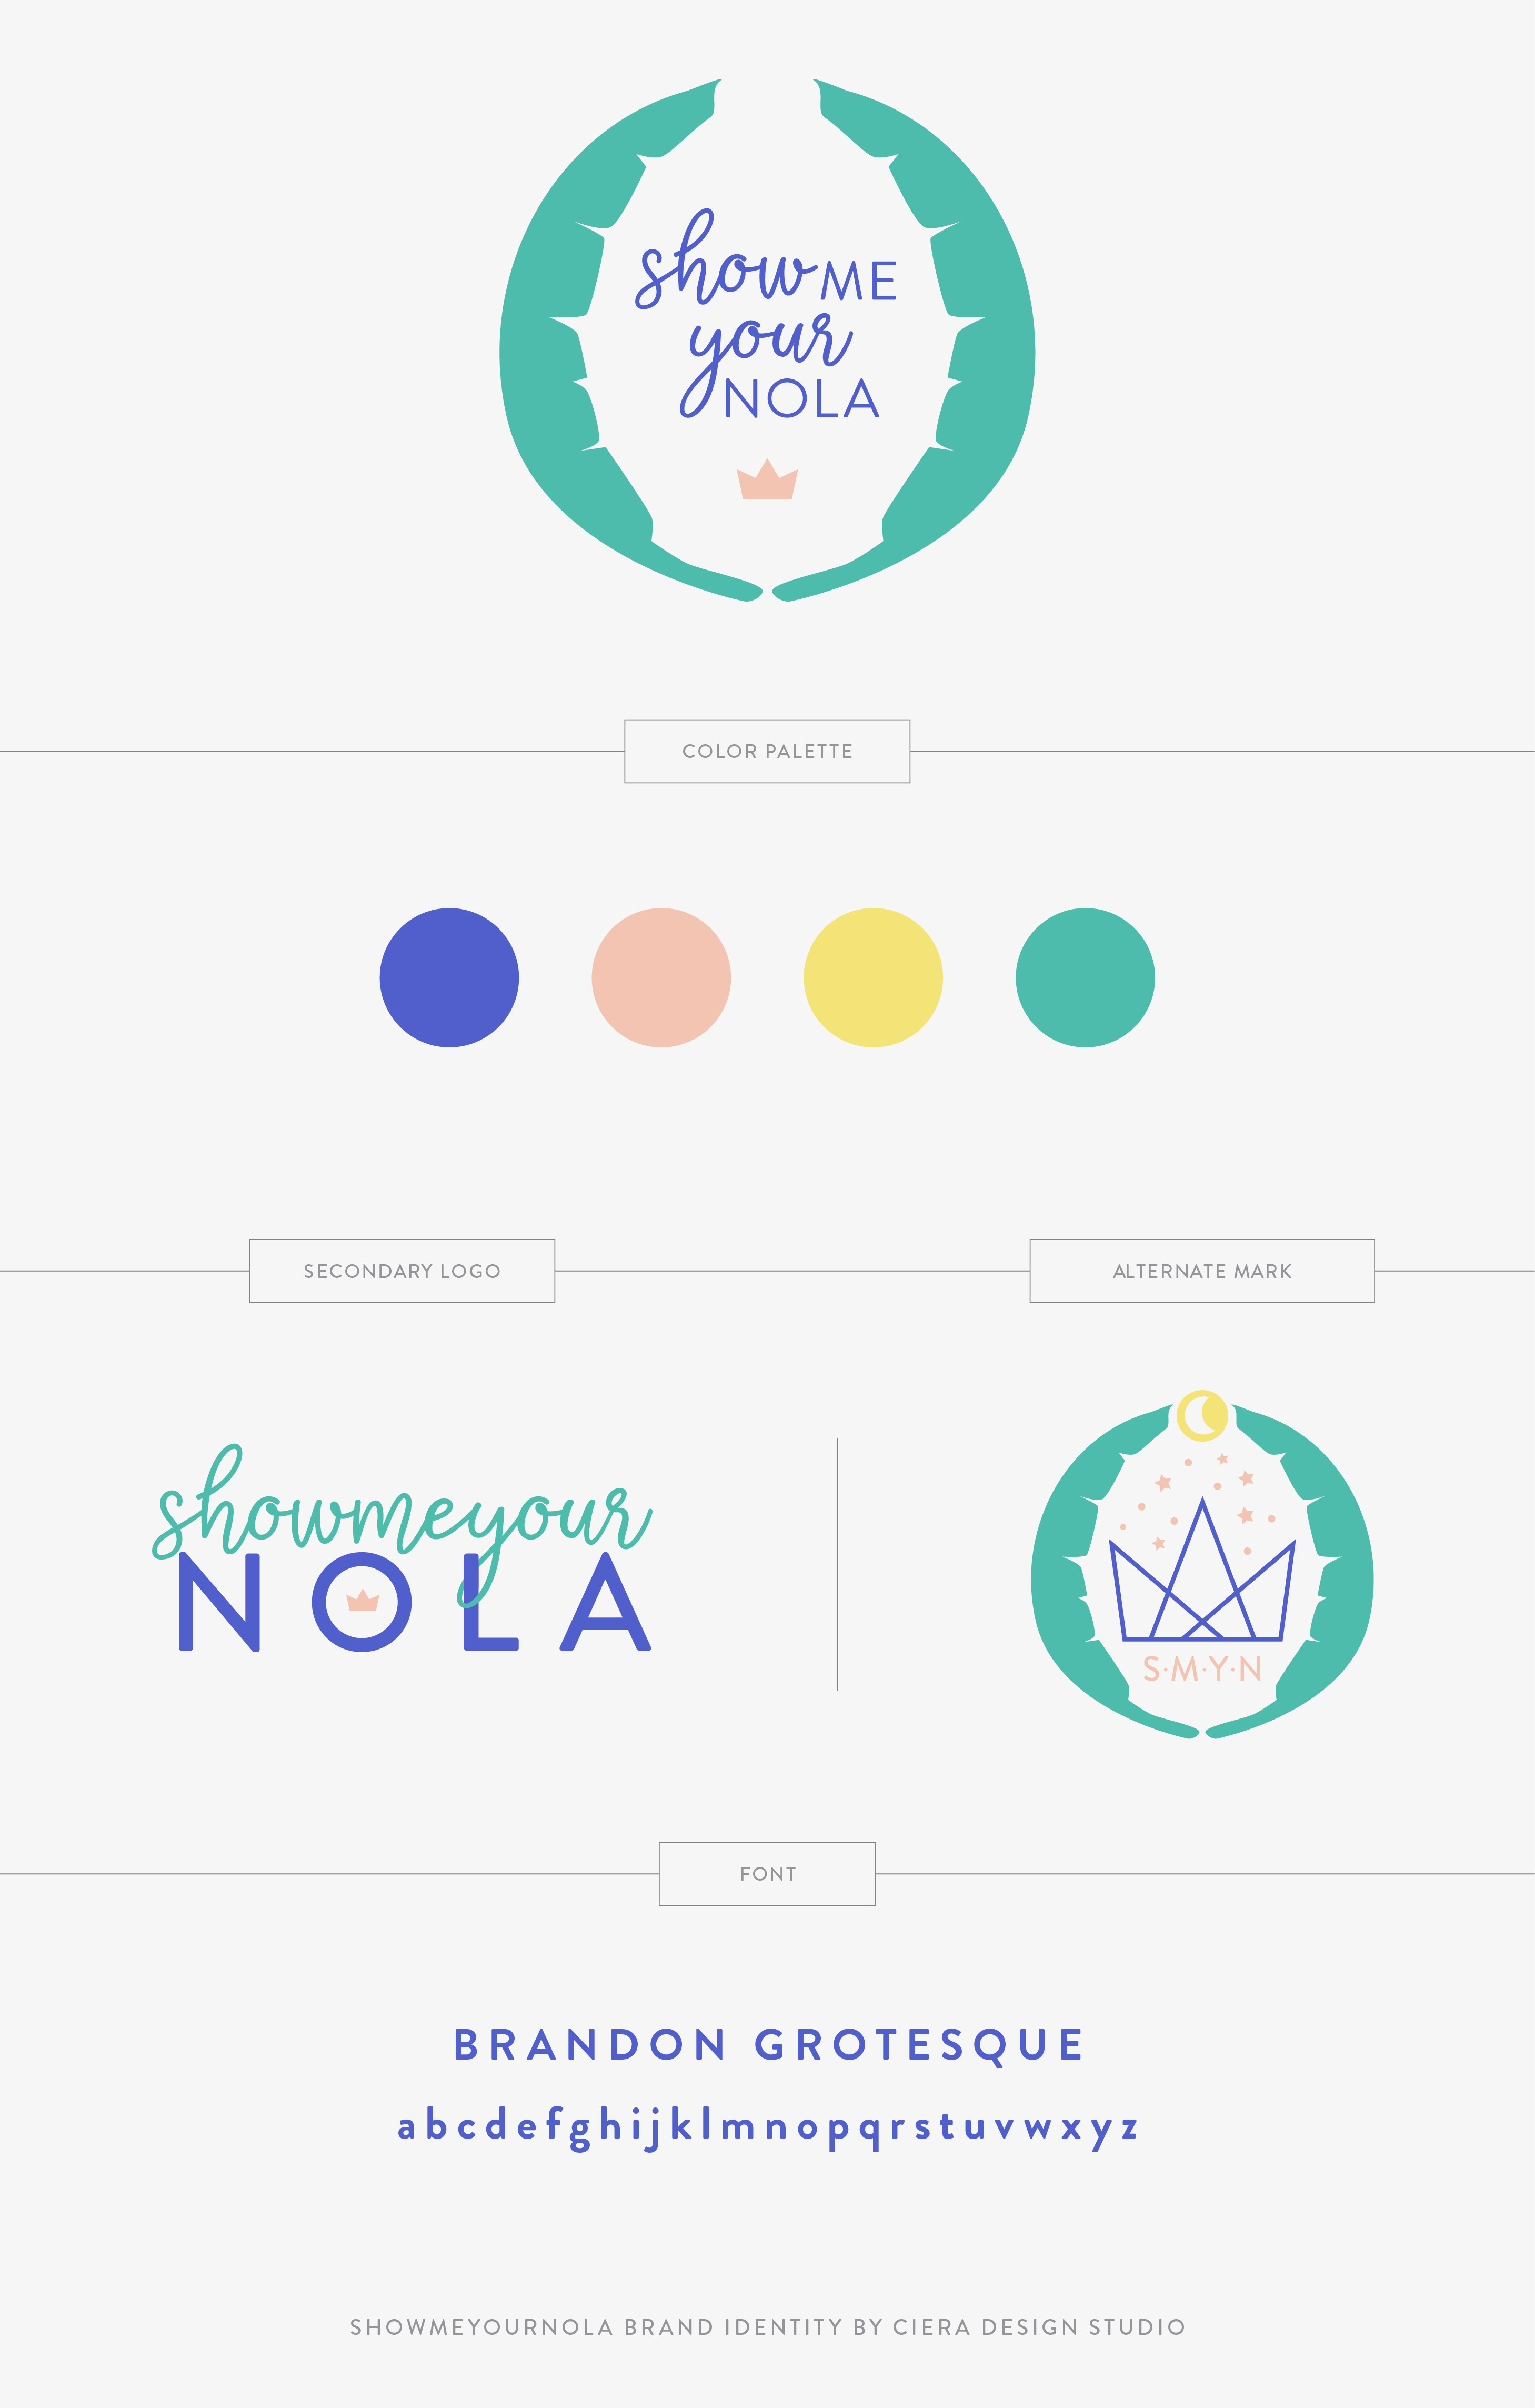 We created a clean, simple and chic logo that also expresses the fun, whimsy and magic of New Orleans. The brand identity is friendly and joyful while also showing the expertise, reliability and authenticity of founder Danielle Granger Nava. The brand image targets Millennial women, professionals, entrepreneurs and lovers of food & travel. Ciera Design Studio has been helping creative businesses stand out and exceed their biggest goals through strategic design & branding since 2010.